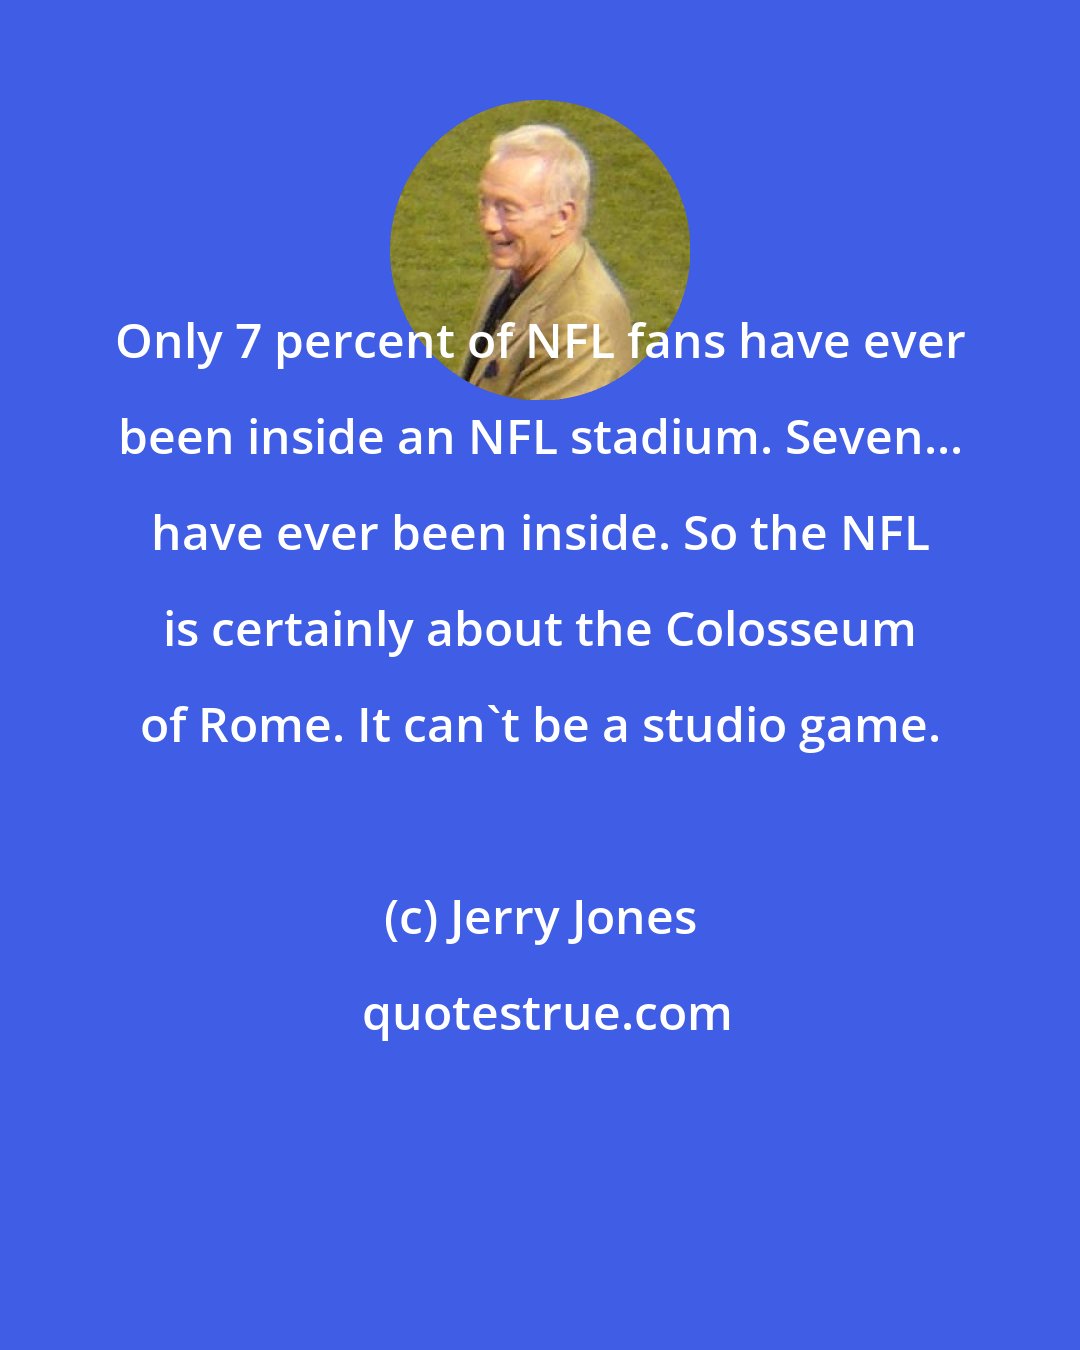 Jerry Jones: Only 7 percent of NFL fans have ever been inside an NFL stadium. Seven... have ever been inside. So the NFL is certainly about the Colosseum of Rome. It can't be a studio game.